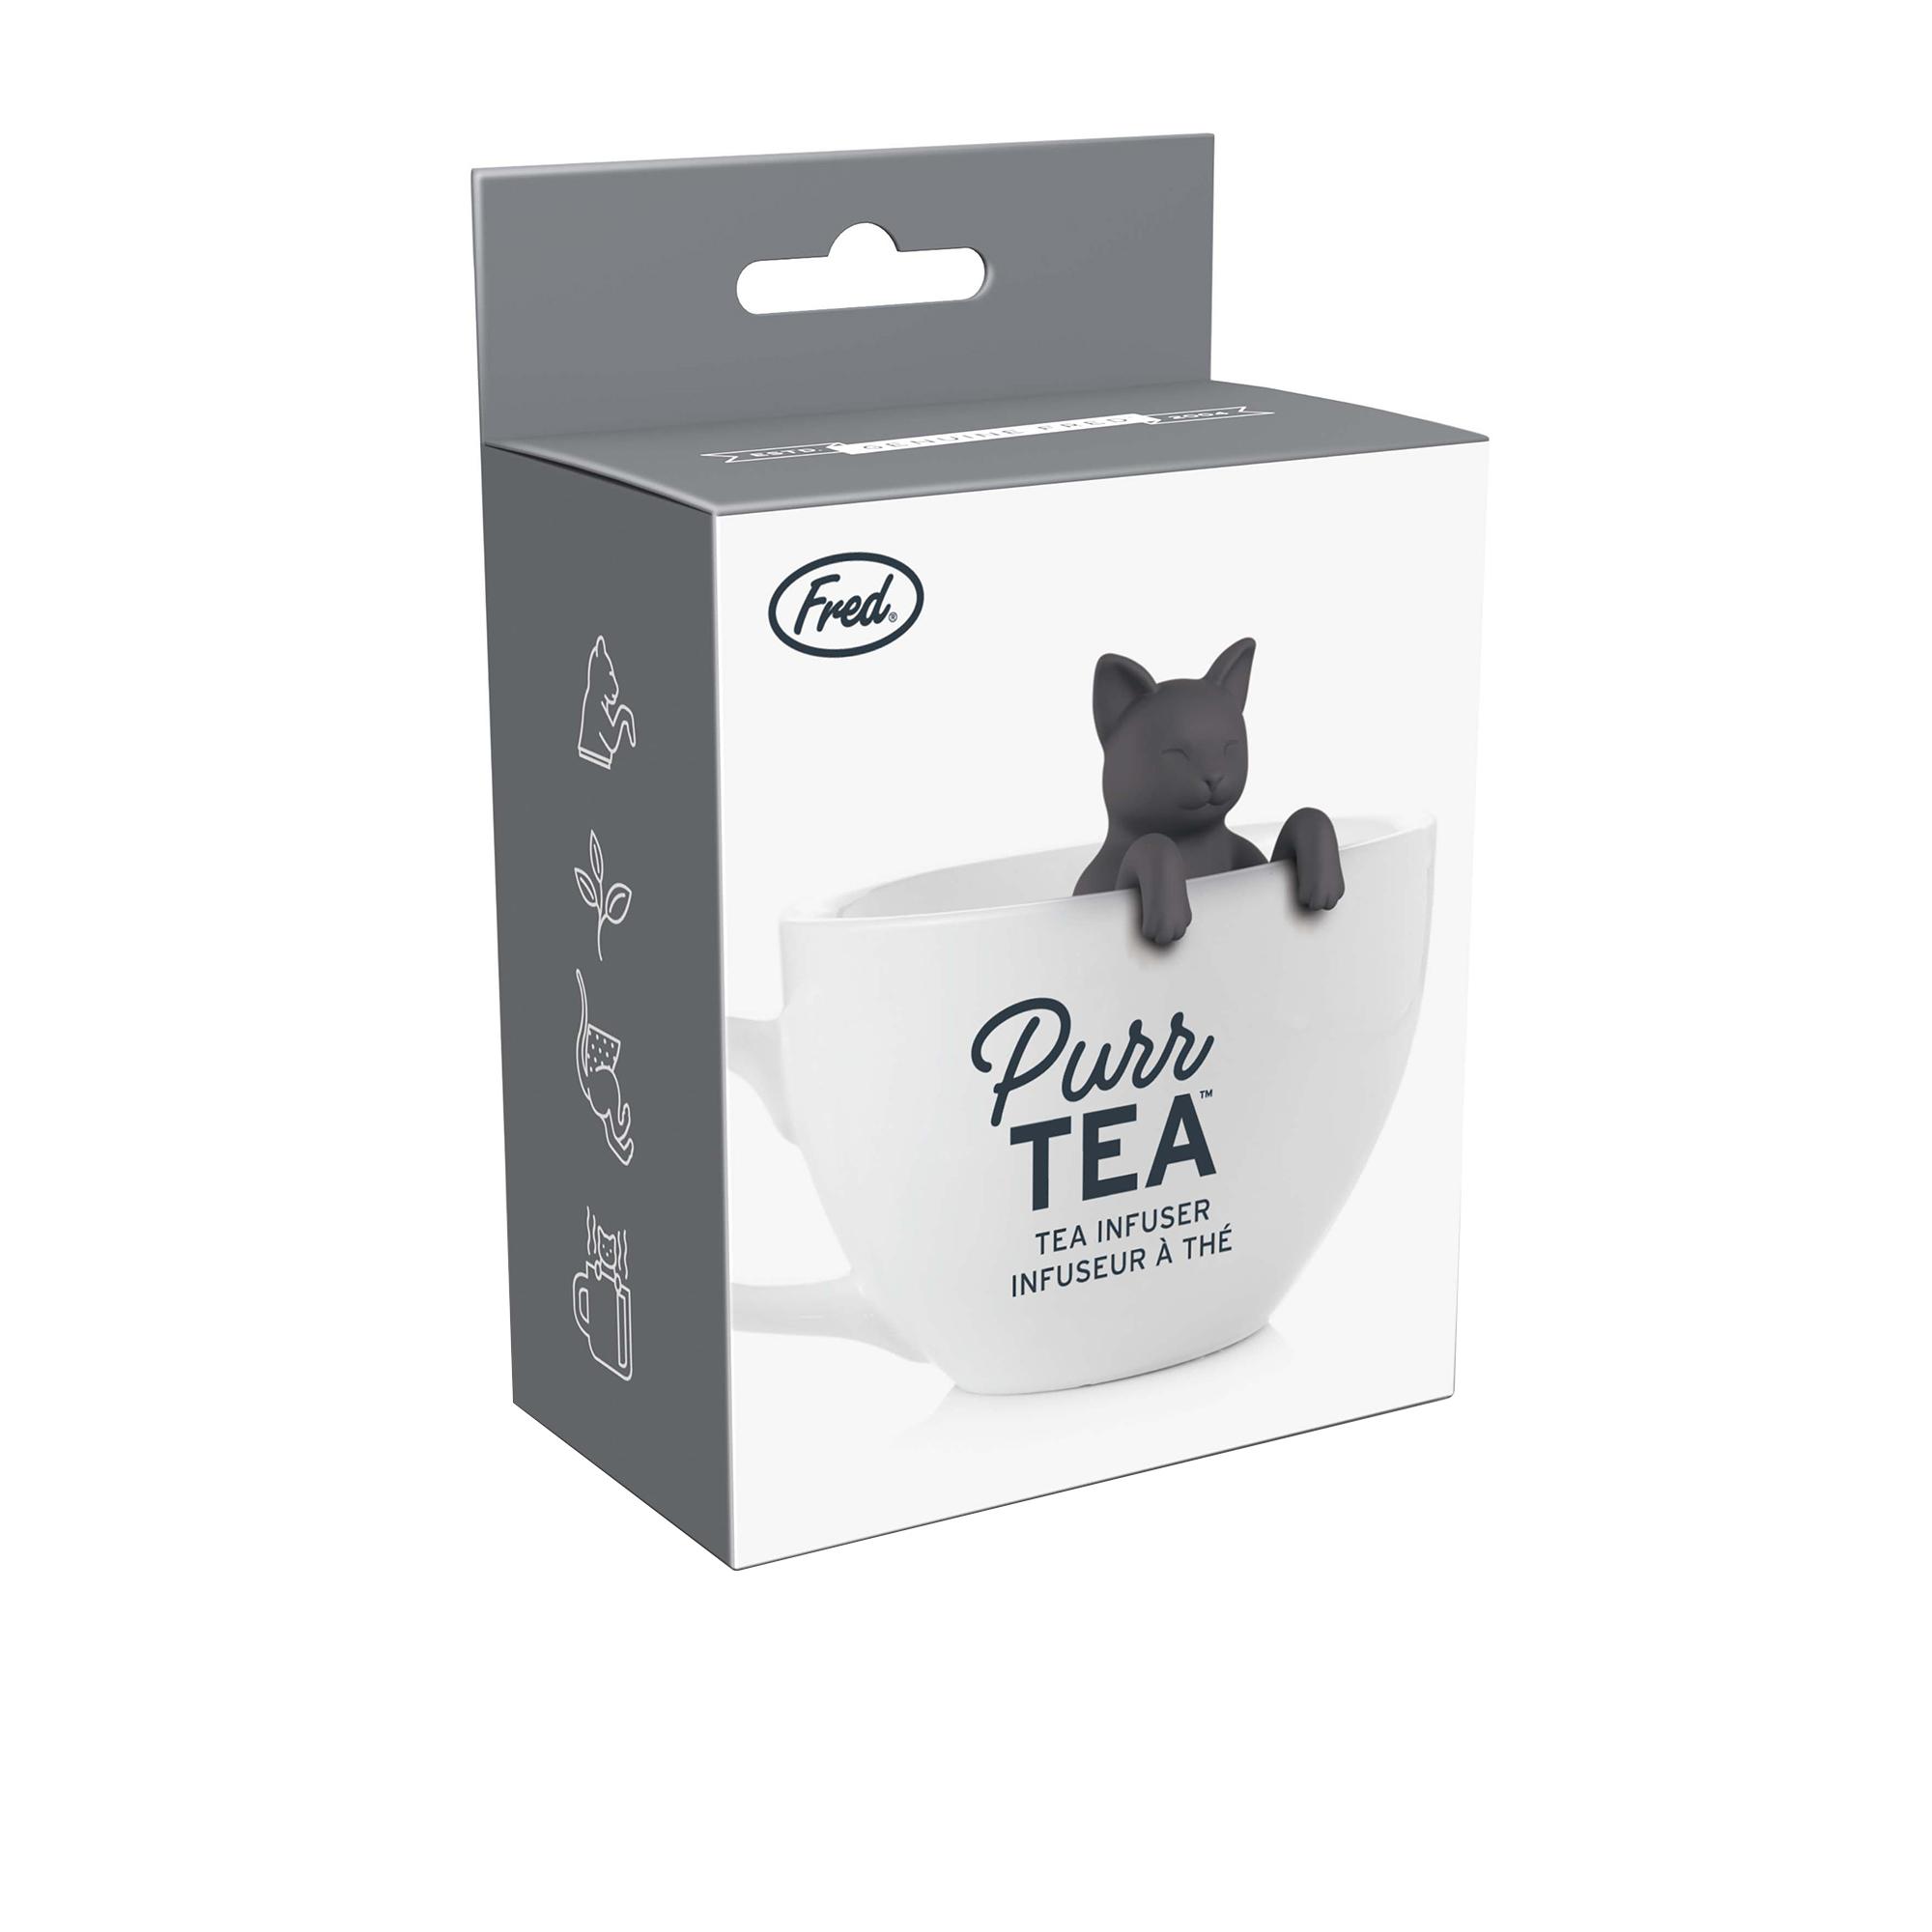 Fred Purr Cat Tea Infuser Image 6